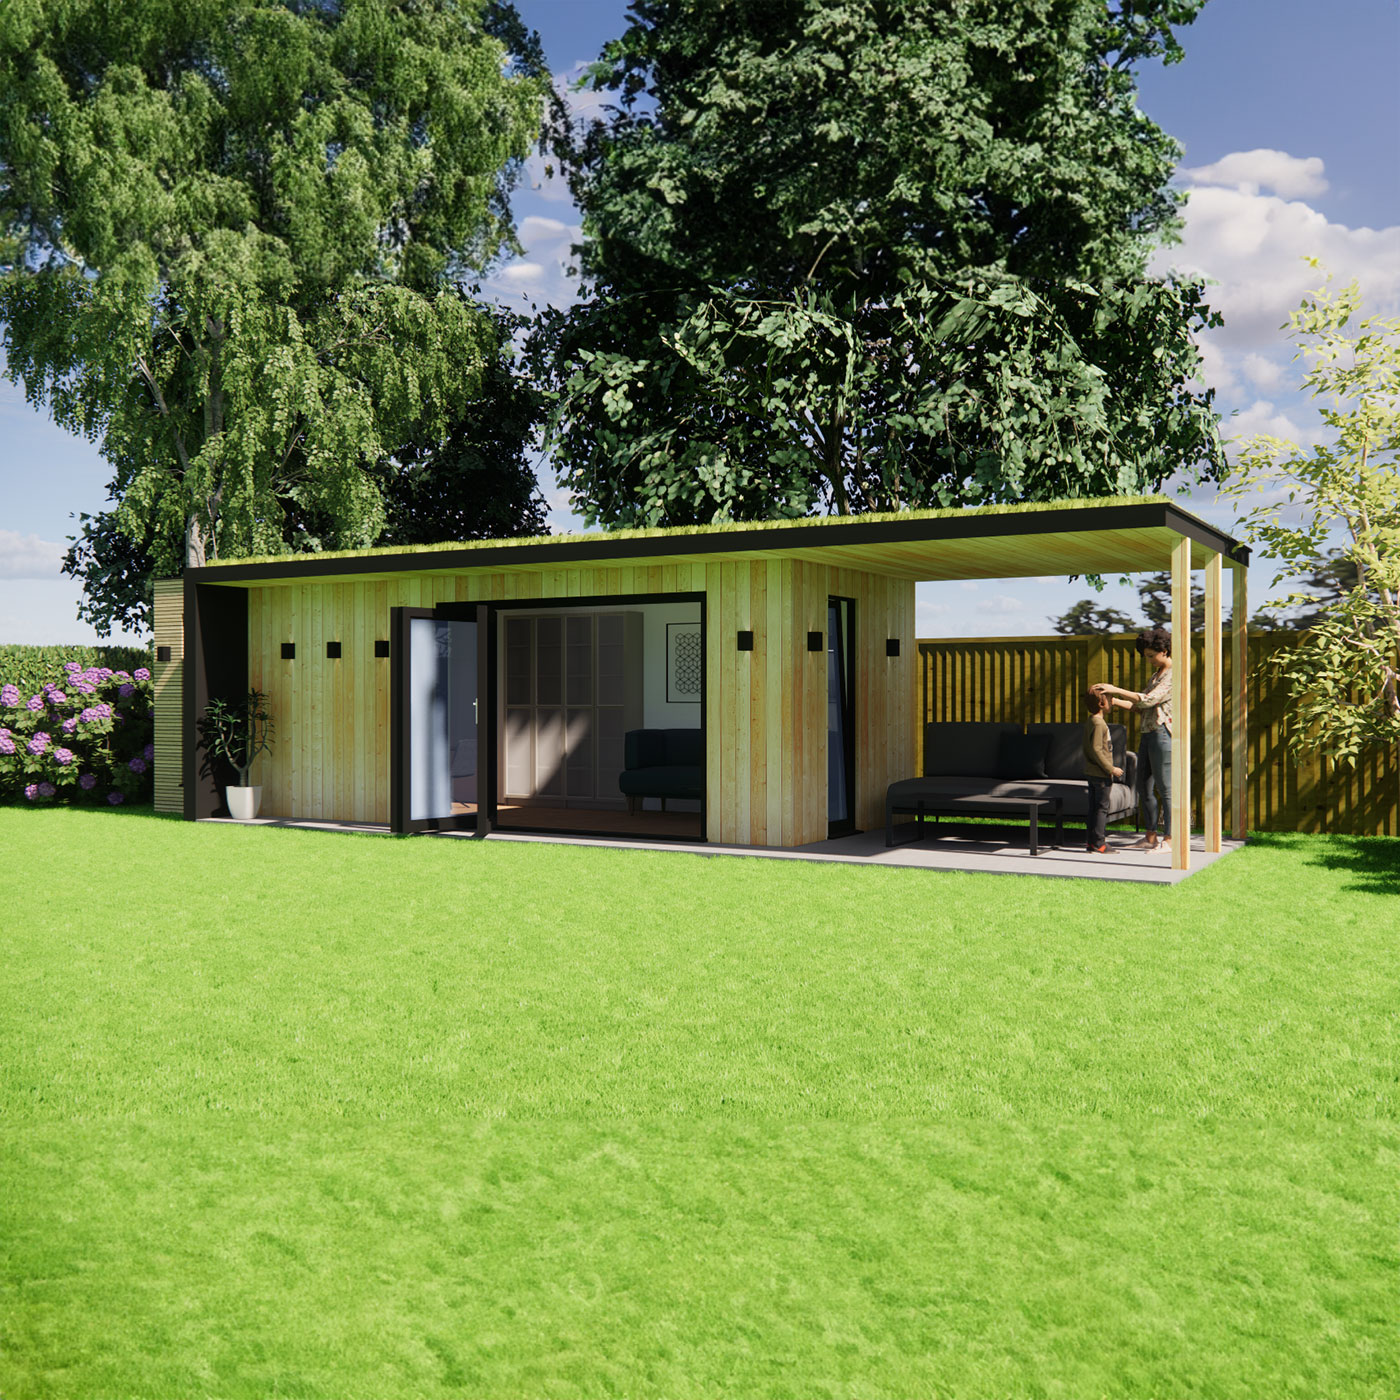 Visualisation of garden office with green roof 2.6m by 7.4m